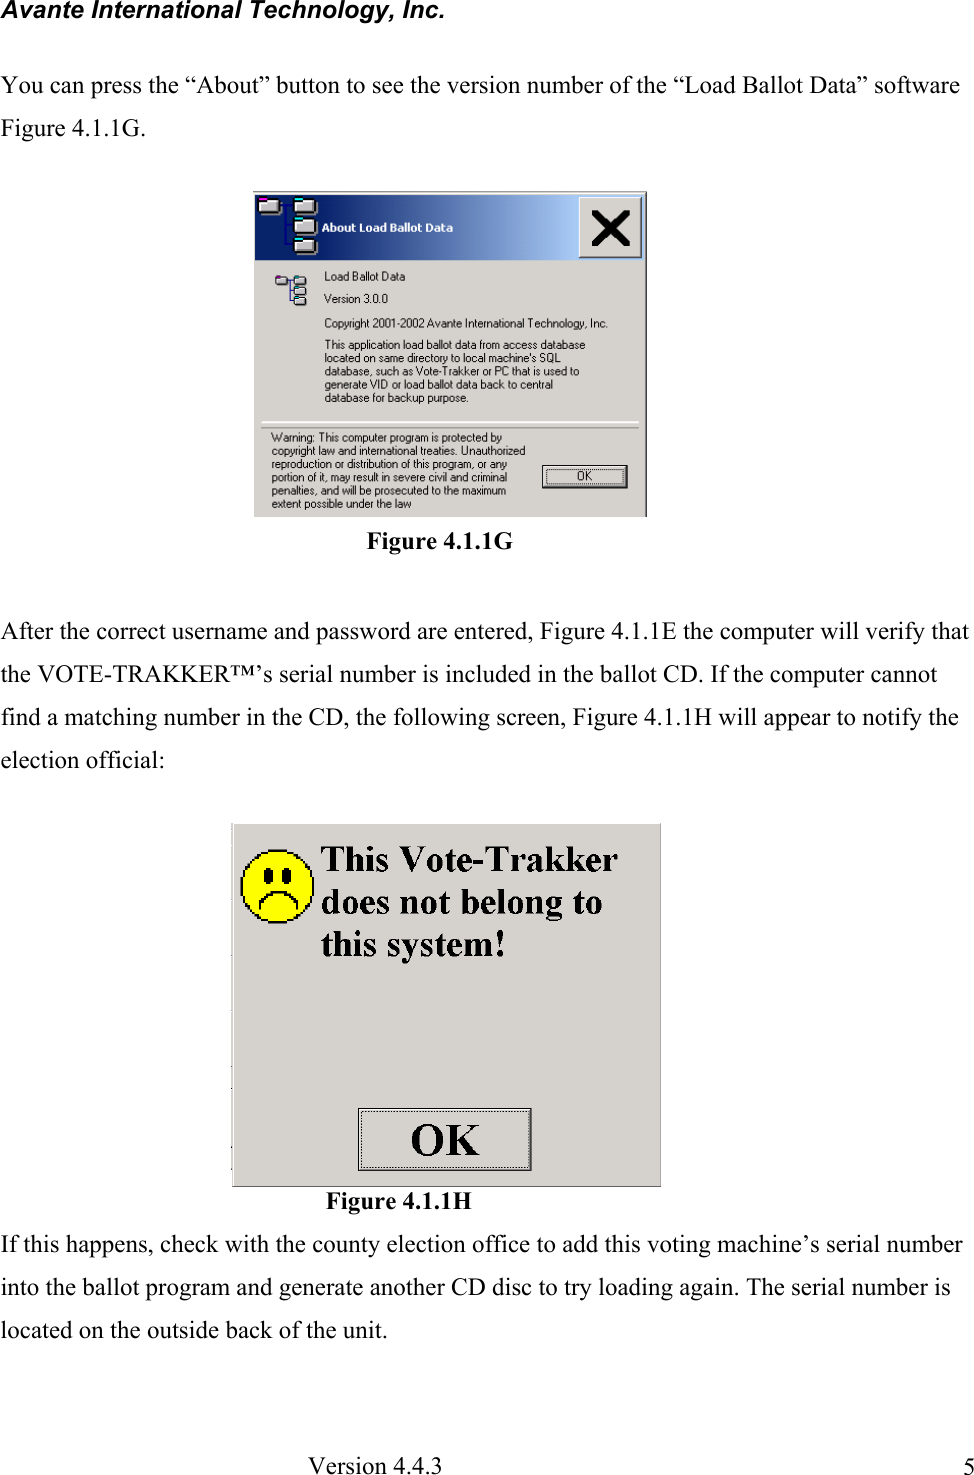 Avante International Technology, Inc.  Version 4.4.3  5You can press the “About” button to see the version number of the “Load Ballot Data” software Figure 4.1.1G.  After the correct username and password are entered, Figure 4.1.1E the computer will verify that the VOTE-TRAKKER™’s serial number is included in the ballot CD. If the computer cannot find a matching number in the CD, the following screen, Figure 4.1.1H will appear to notify the election official:                                                     Figure 4.1.1H If this happens, check with the county election office to add this voting machine’s serial number into the ballot program and generate another CD disc to try loading again. The serial number is located on the outside back of the unit.  Figure 4.1.1G 